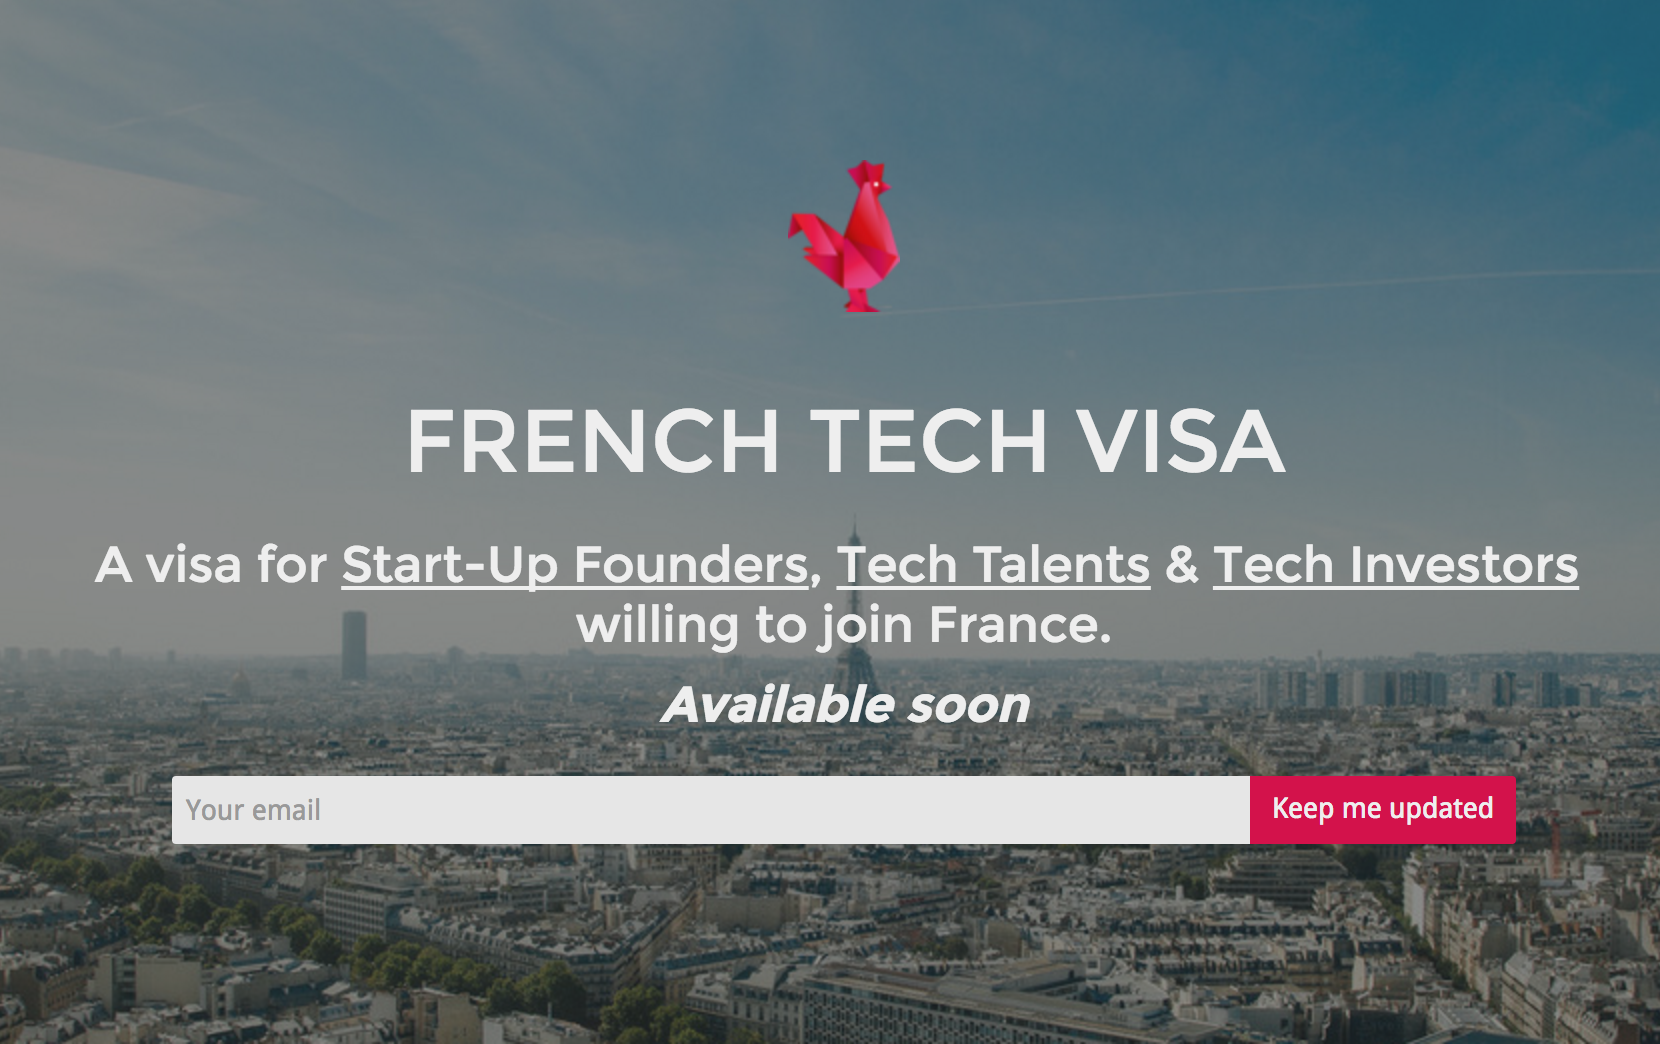 France creates a special visa for entrepreneurs, engineers and investors